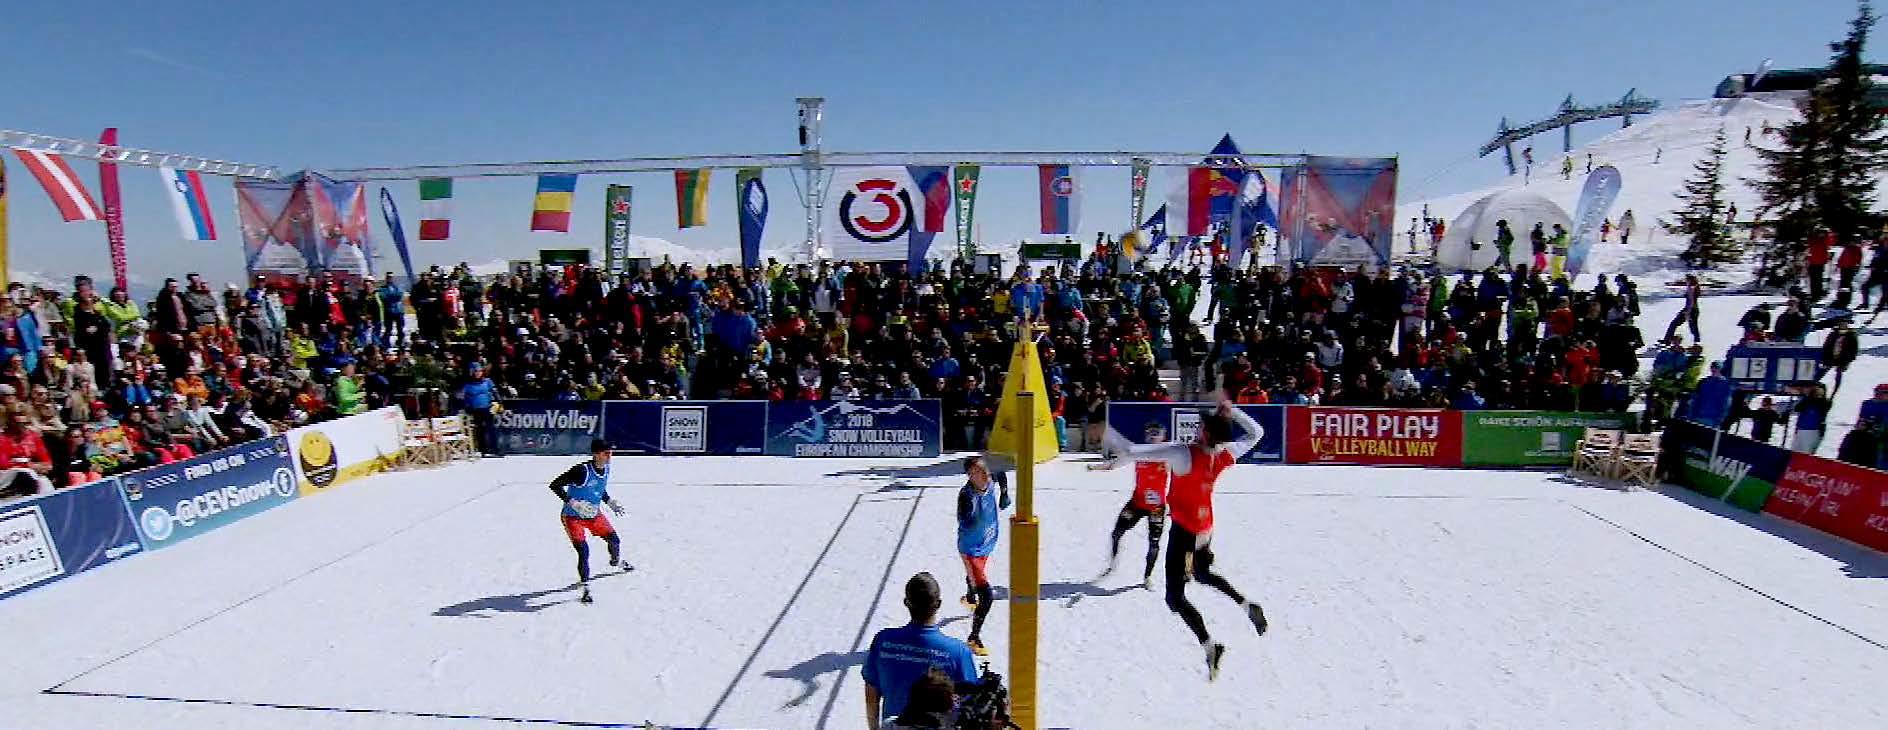 OU Flex set up for the Snow Volleyball tournament in the Austrian Alps